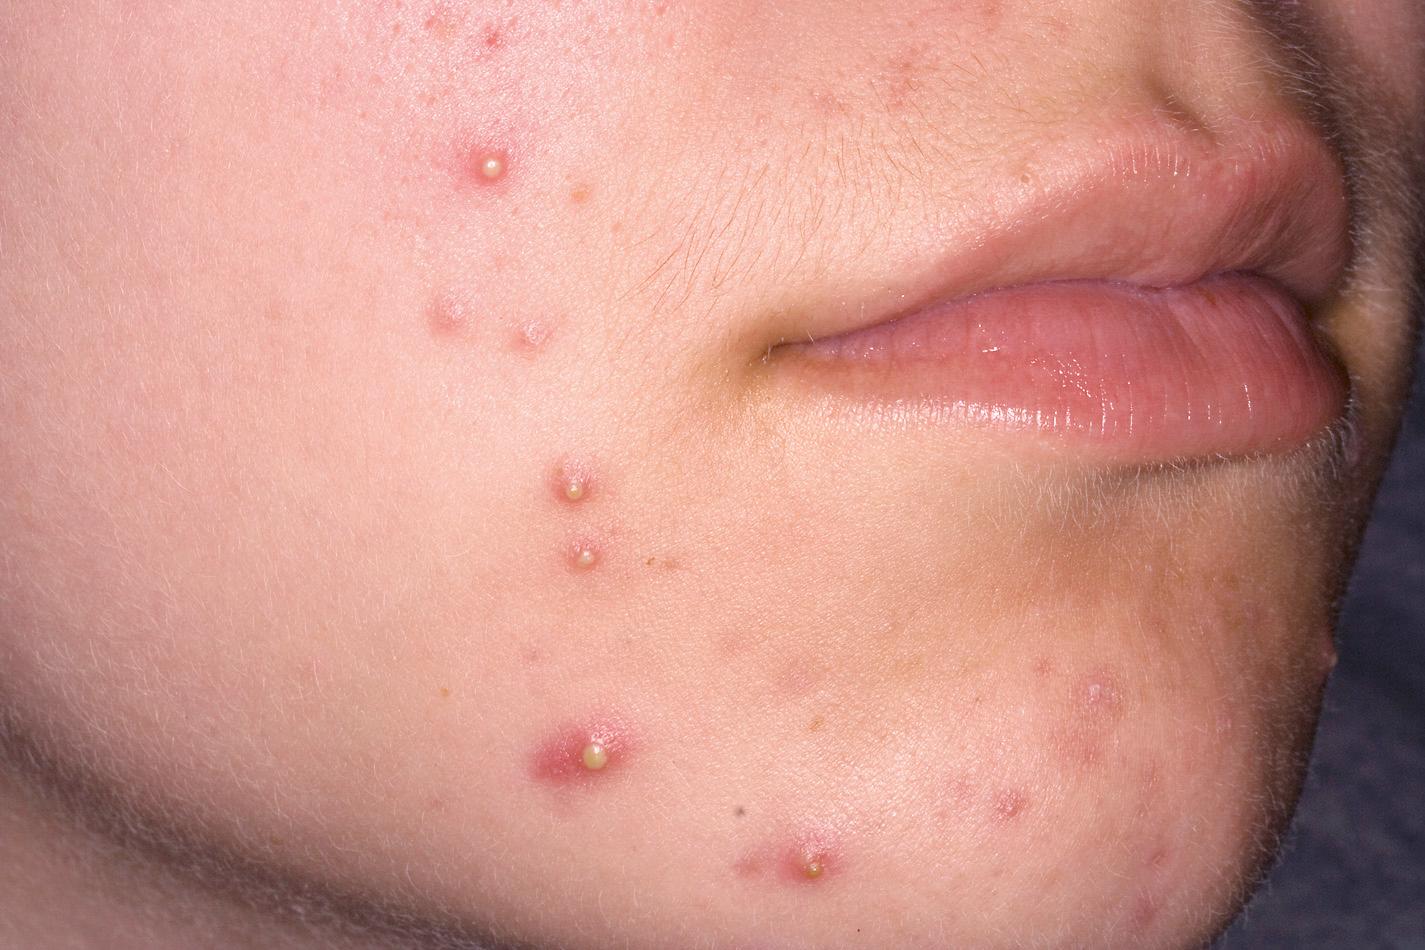 Fig. 4.4, Mild inflammatory acne. Mild acne with papules, pustules, and comedones.